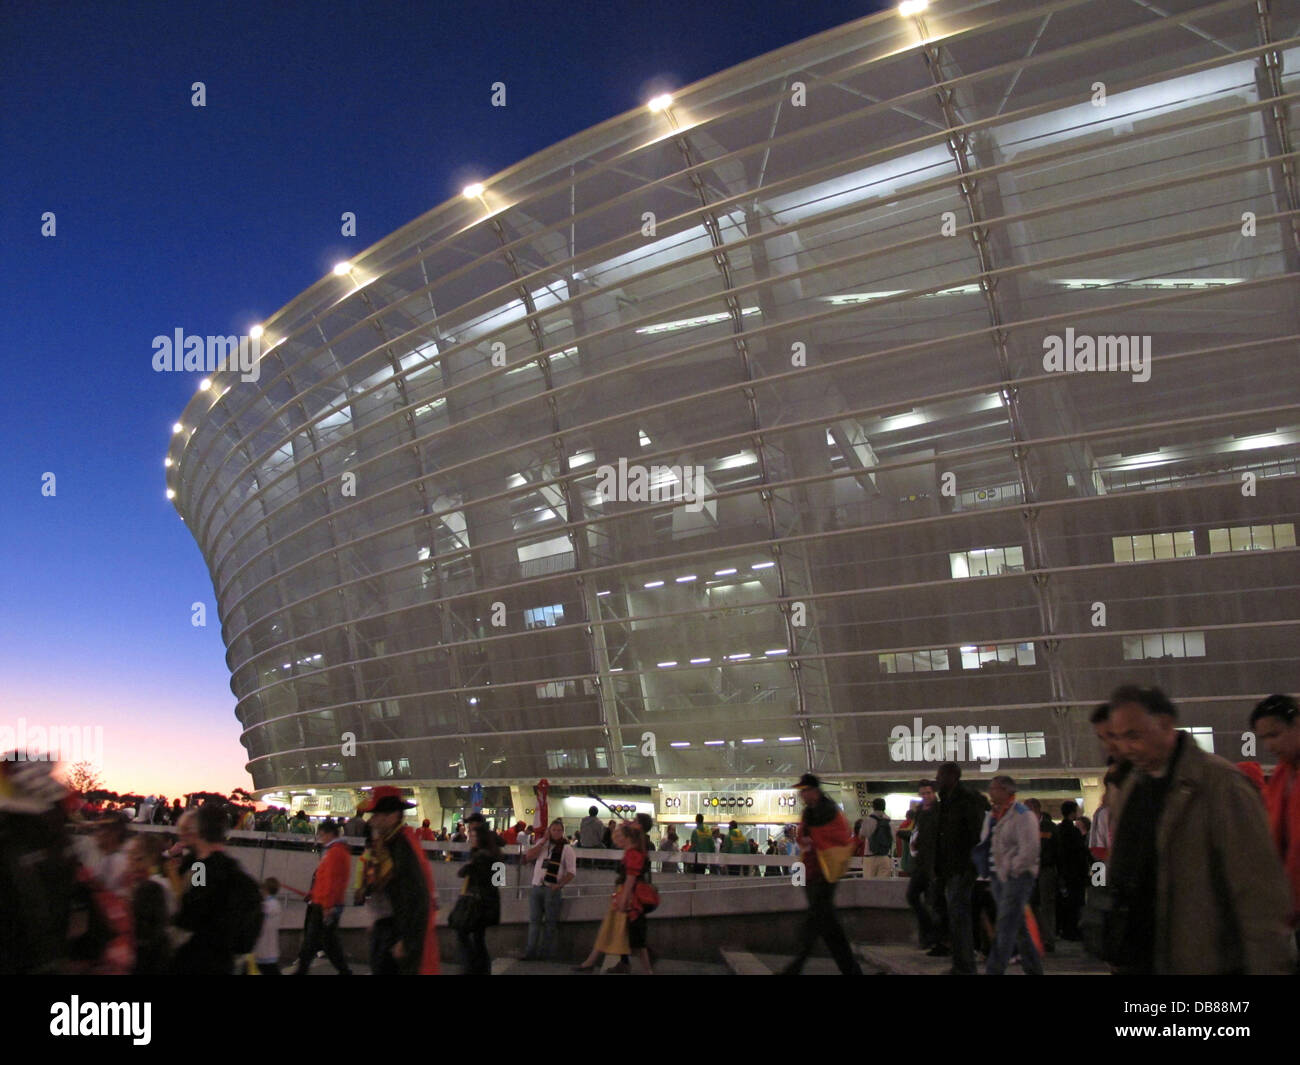 Cape Town Stadium during the 2010 FIFA World Cup Soccer in South Africa Stock Photo